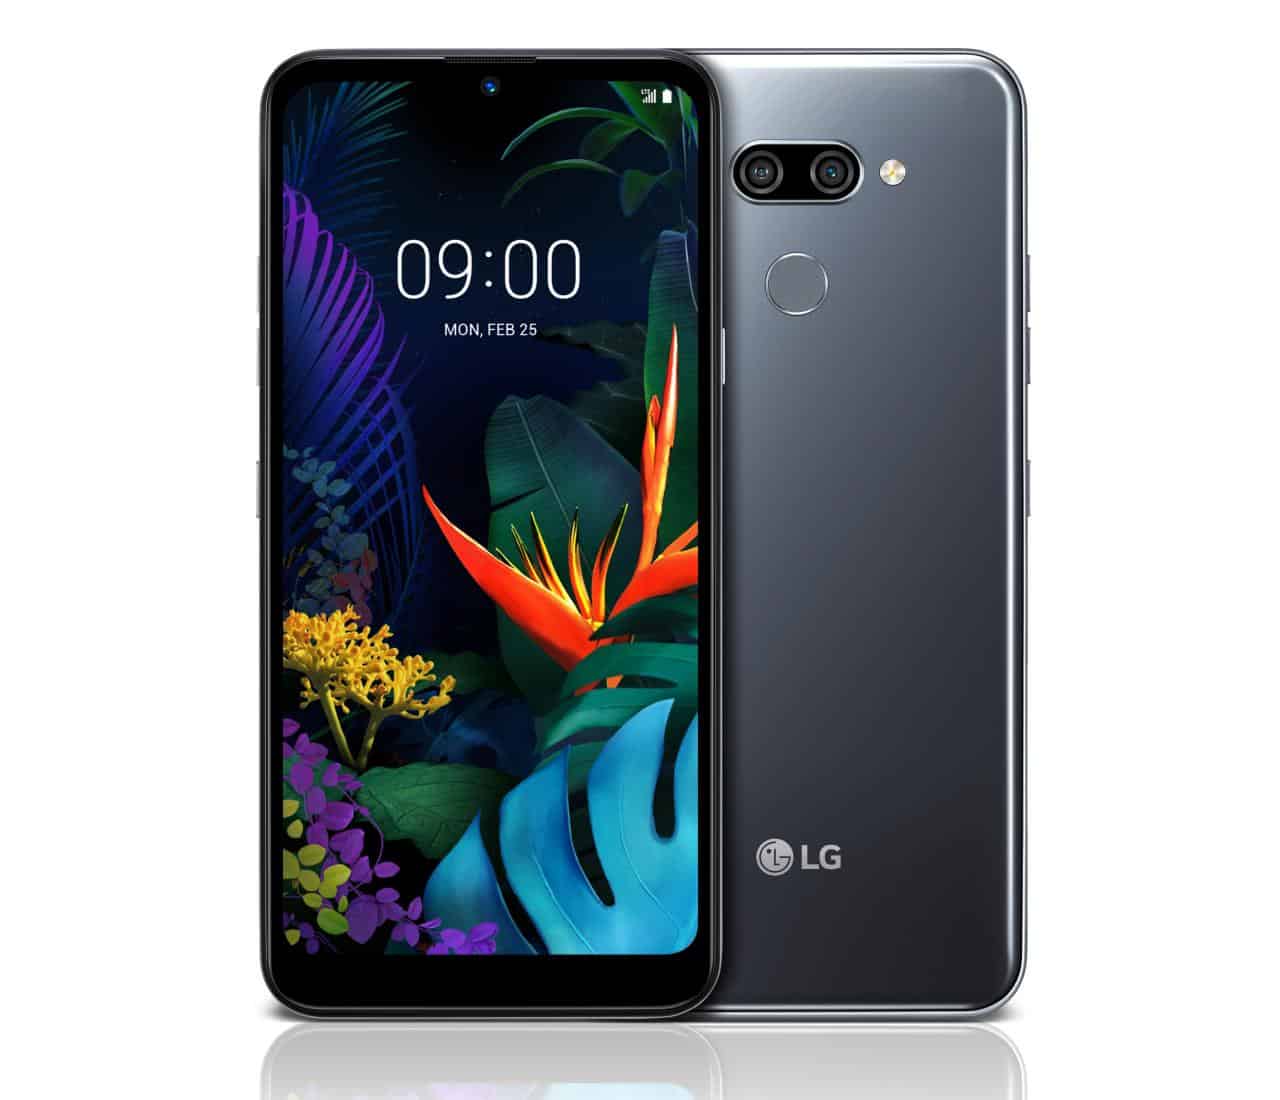 Lg q60, k50, and k40 announced ahead of mwc 2019